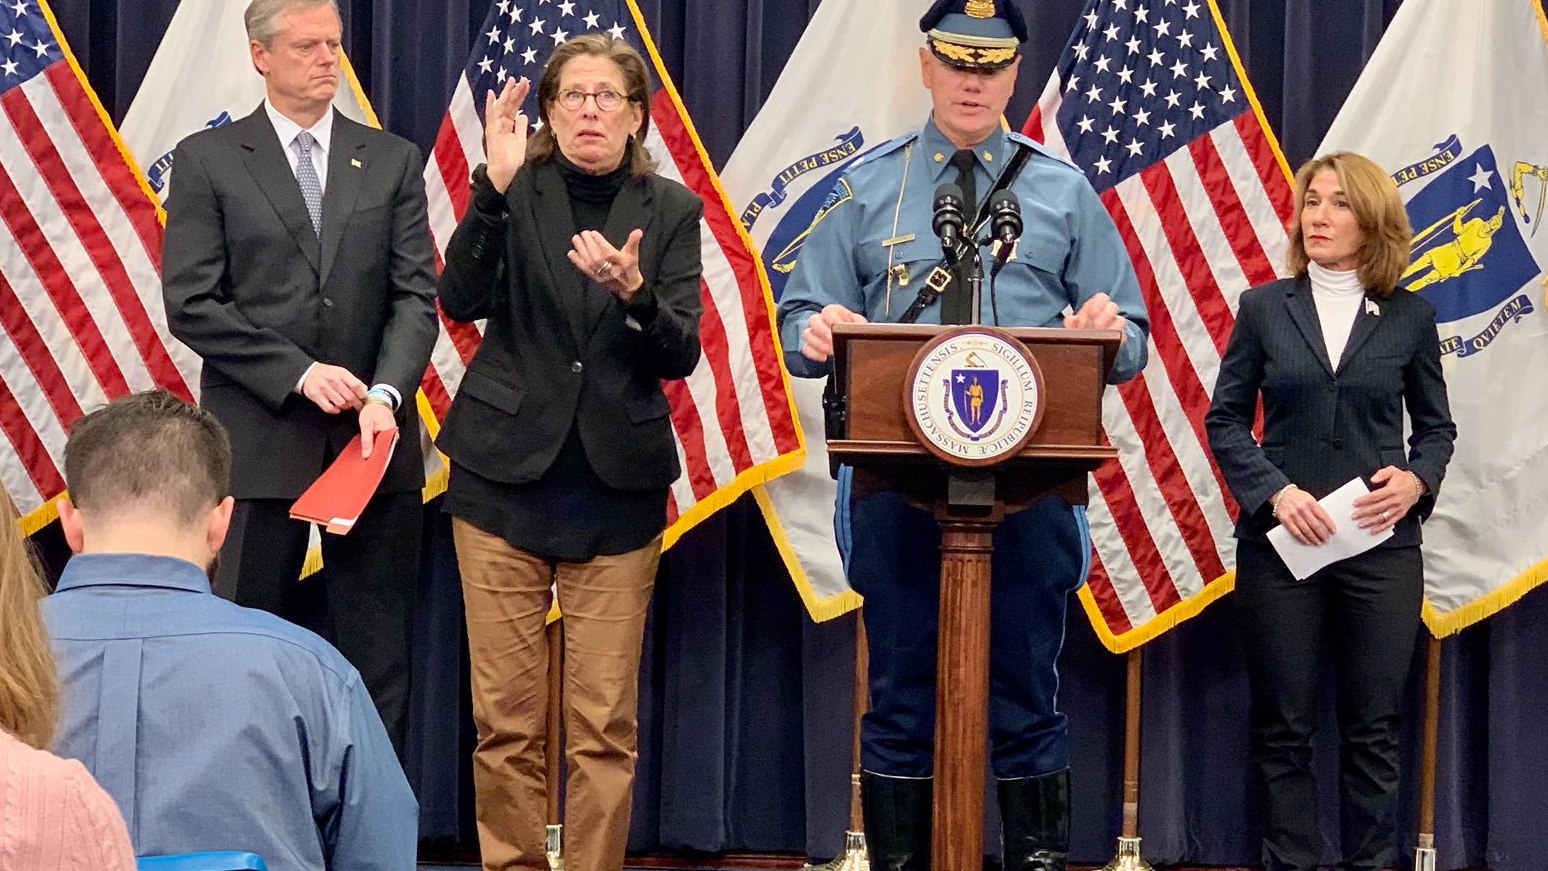 Governor names new head of Mass. State Police